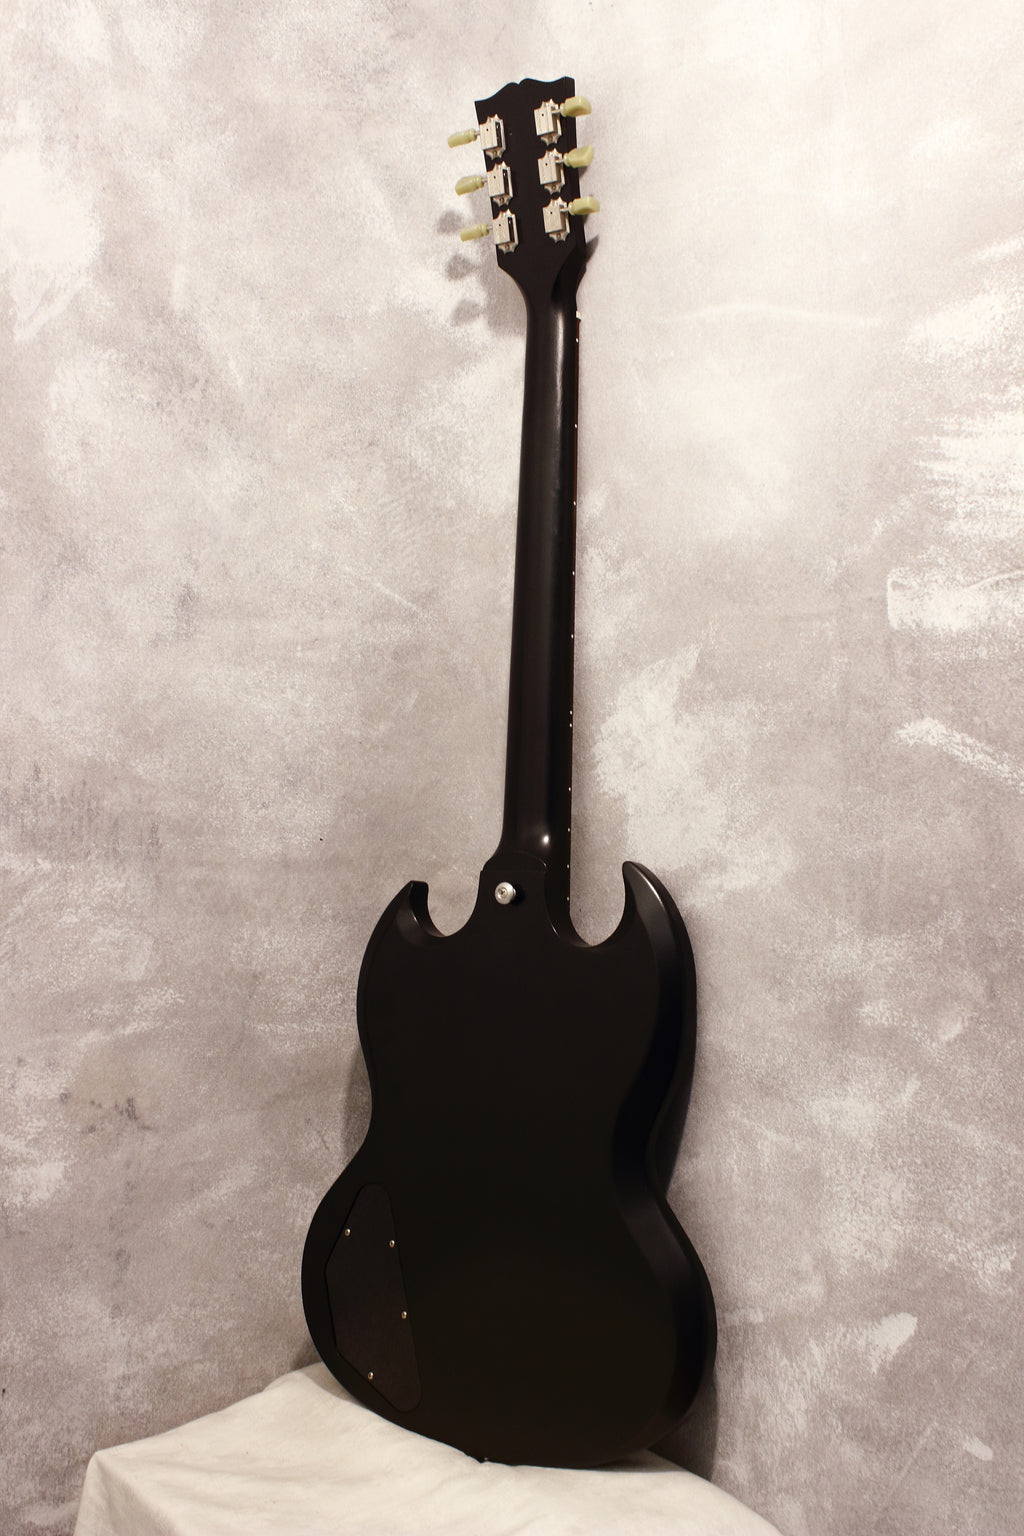 Gibson SG Special T Satin Black 2017